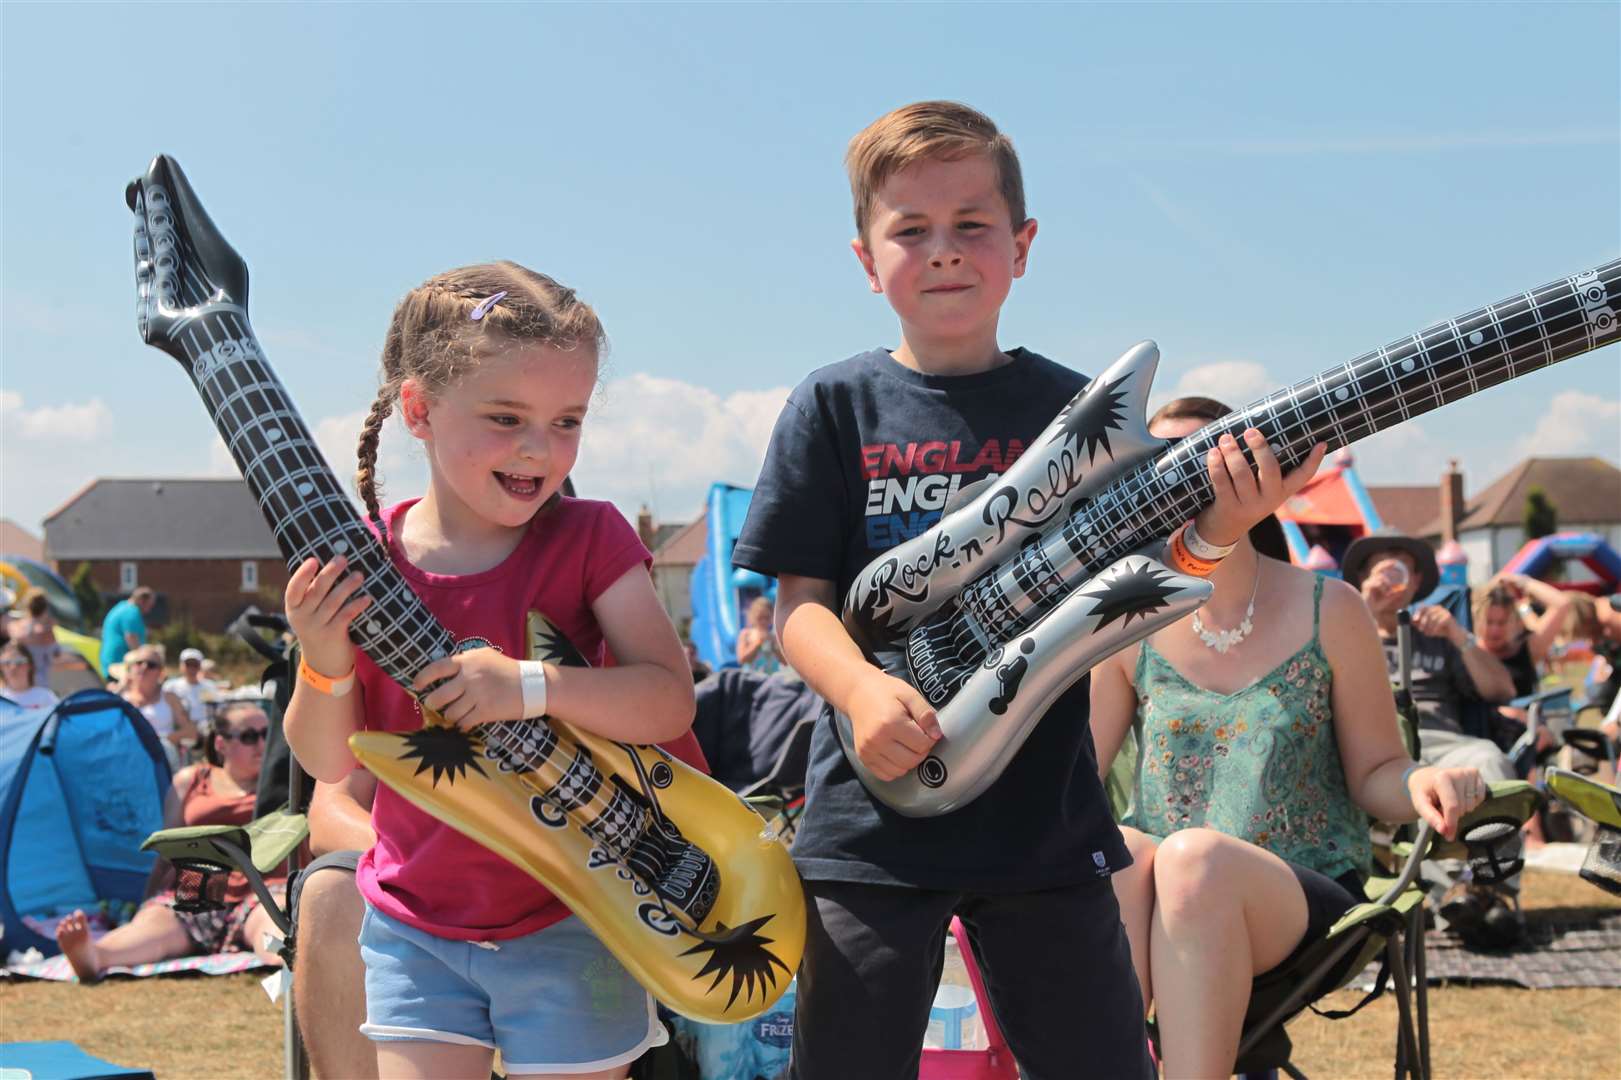 Evie Whittingham, six, with her brother Harry, eight, play air guitar at Iwade Rock 2018. Photo: John Westhrop